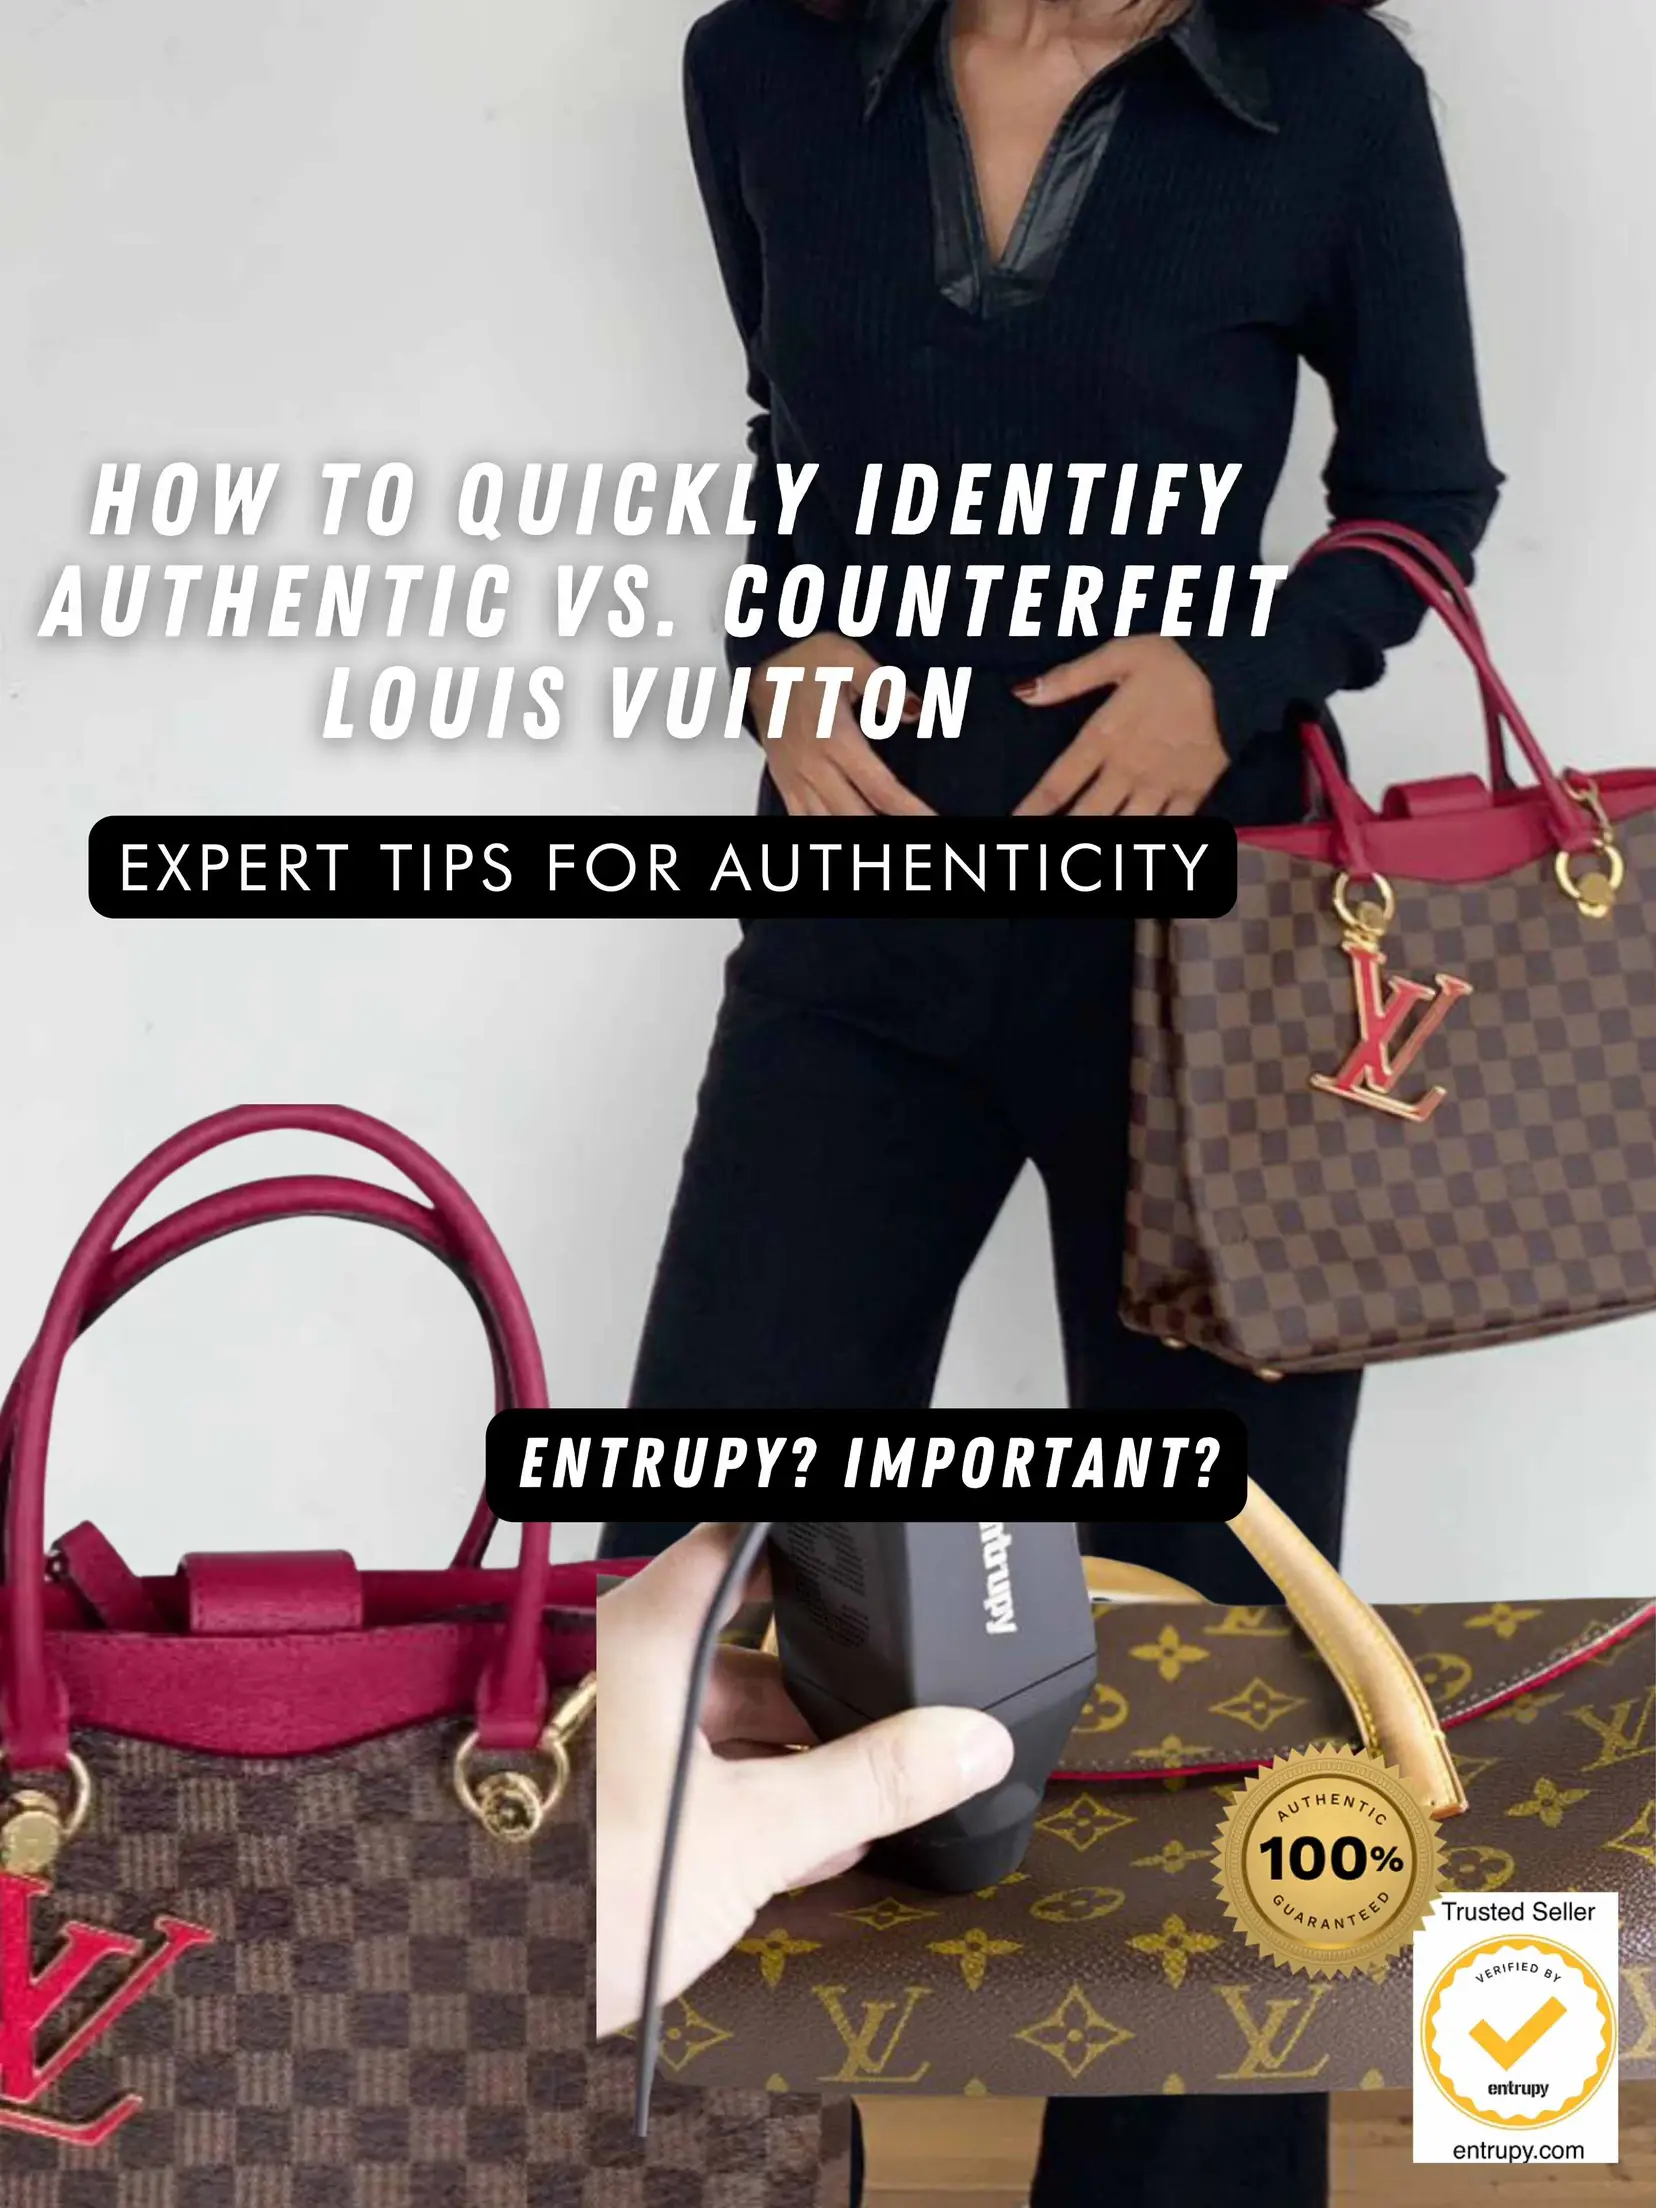 How to Quickly Identify Real vs. Fake LV, Gallery posted by Natasshanjani